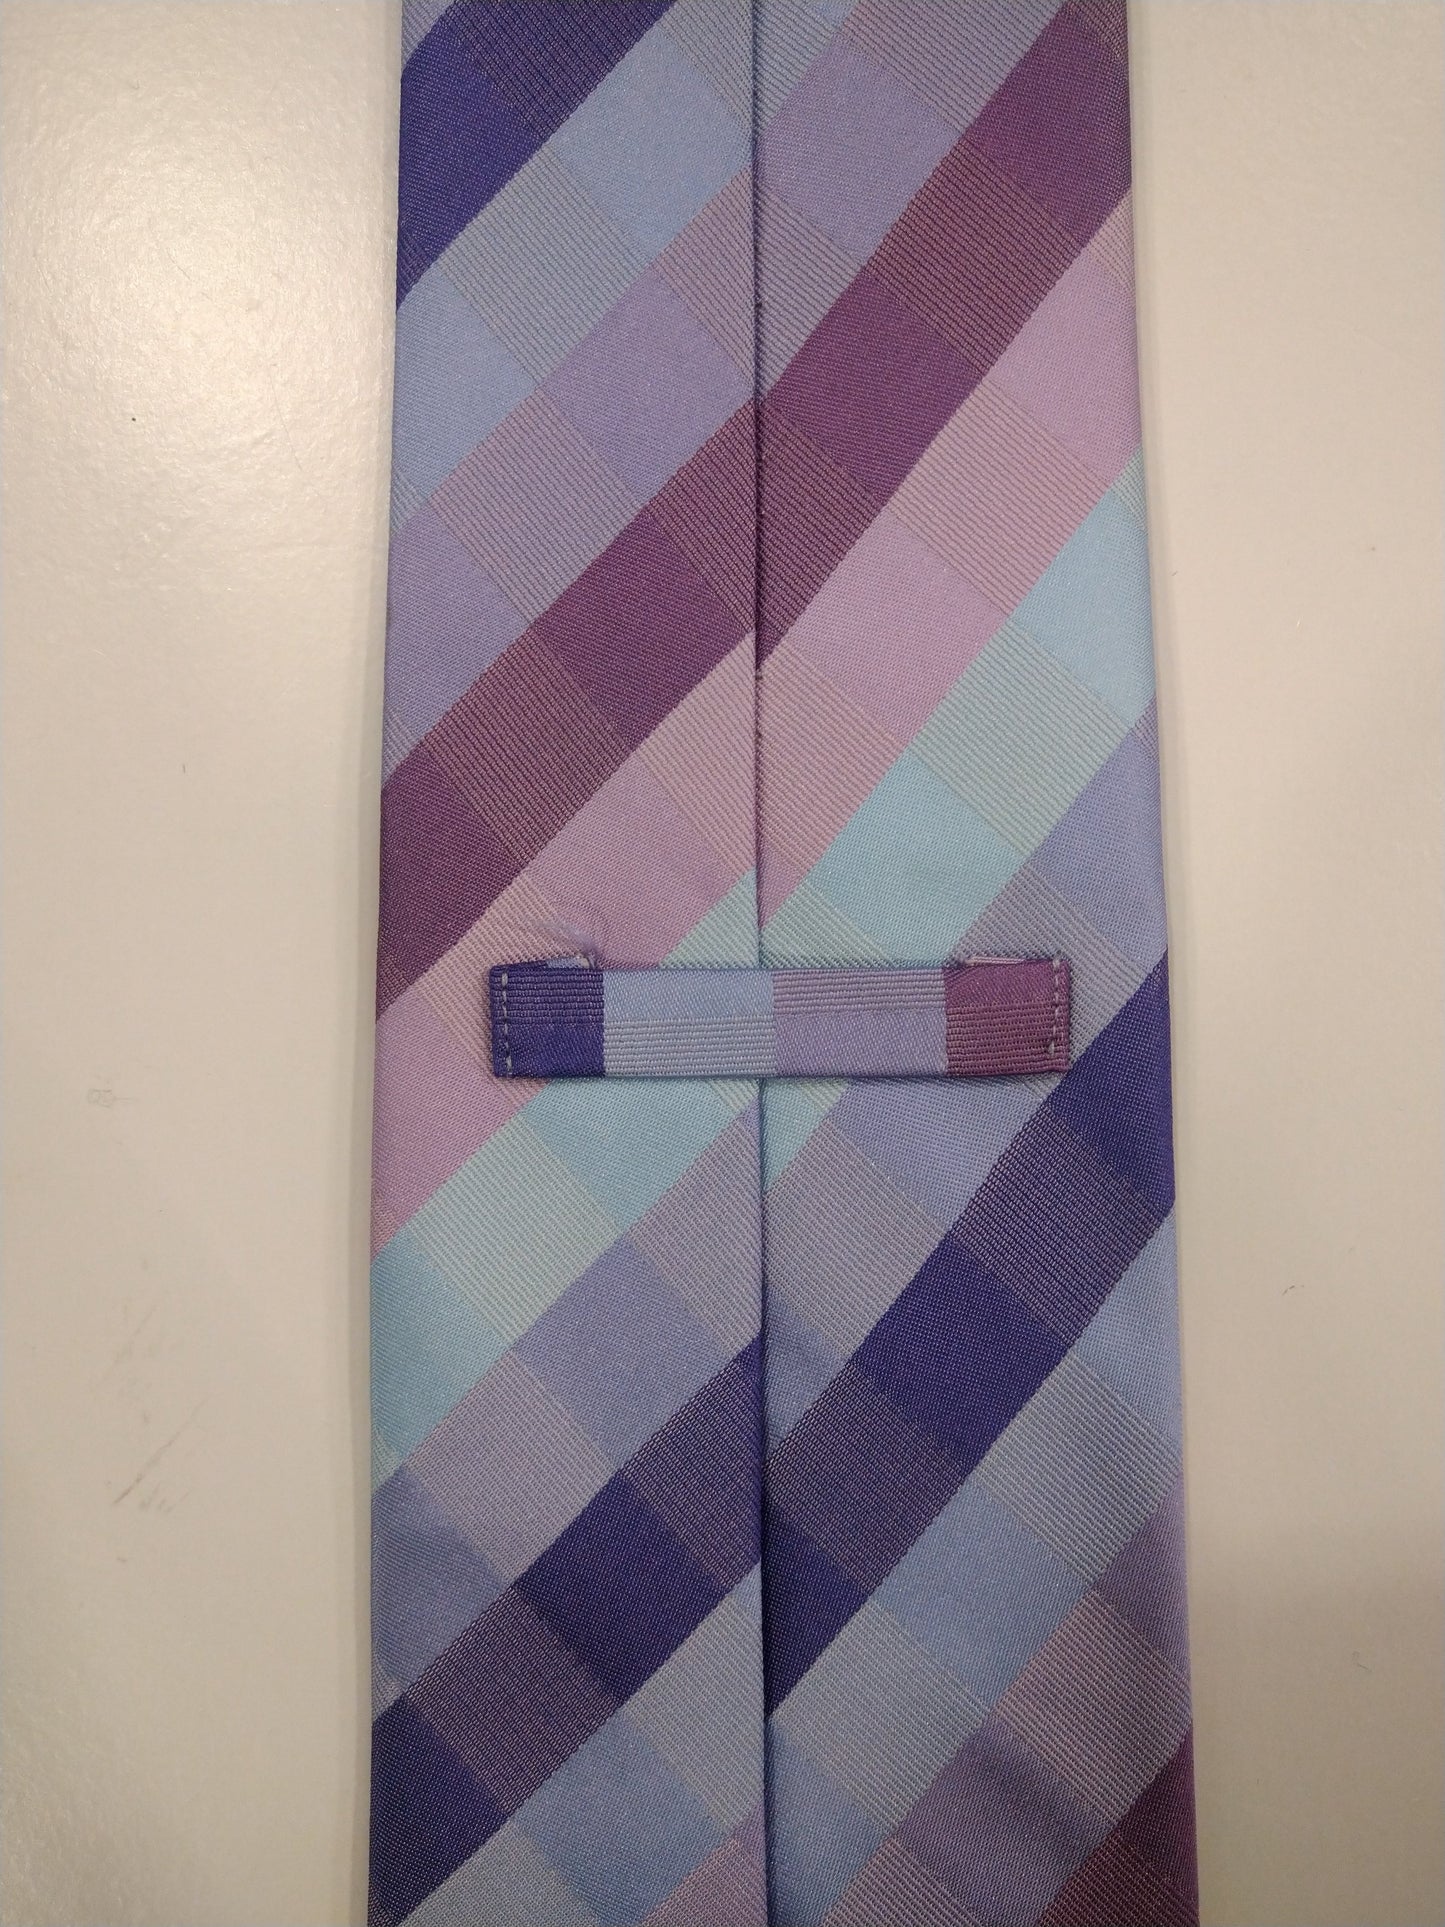 Marks & Spencer silk tie. Purple pink turquoise gray shiny motif.